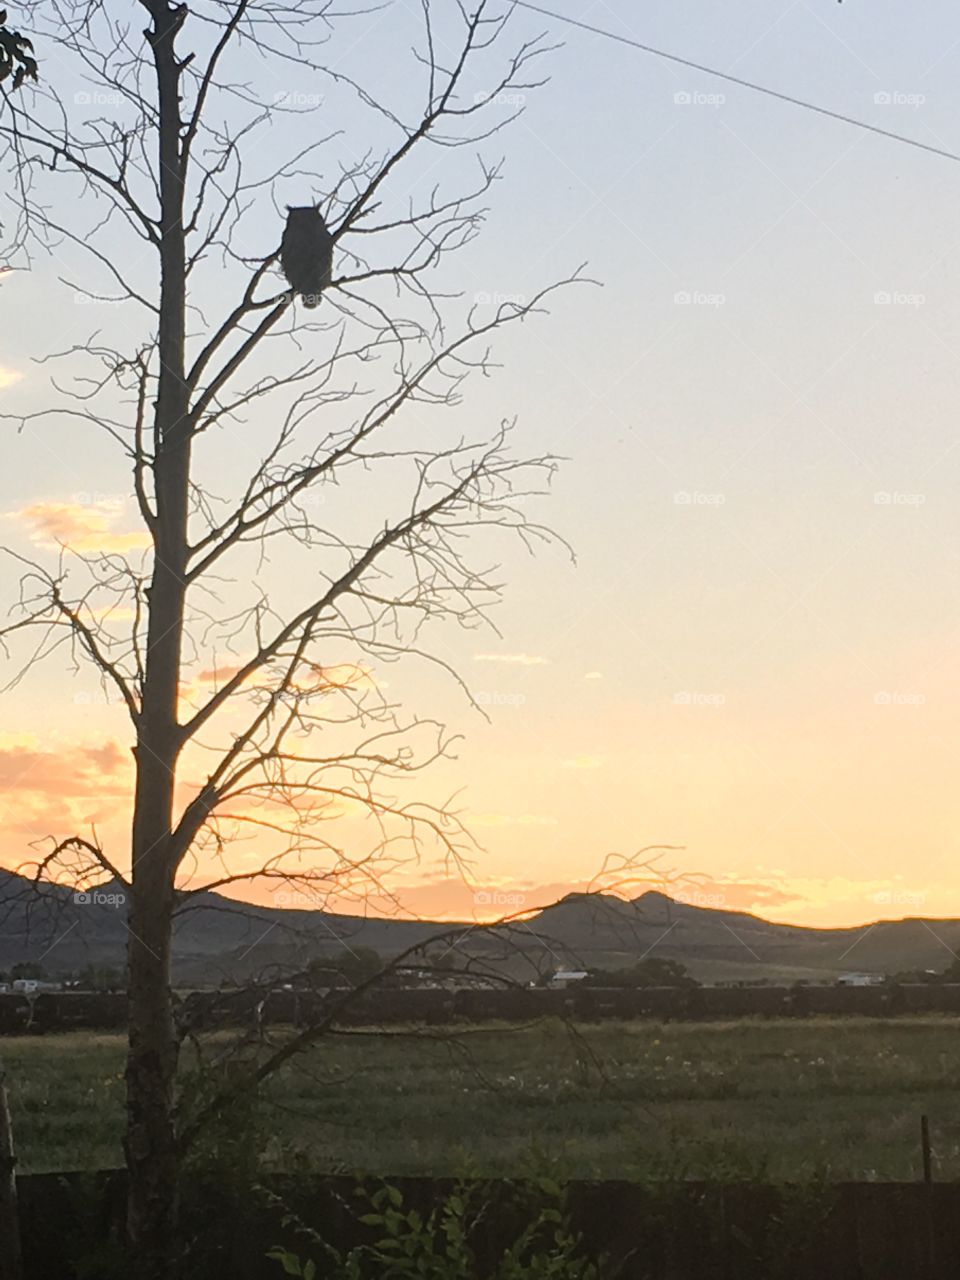 Owl in tree at sunset with mountains in the background. 